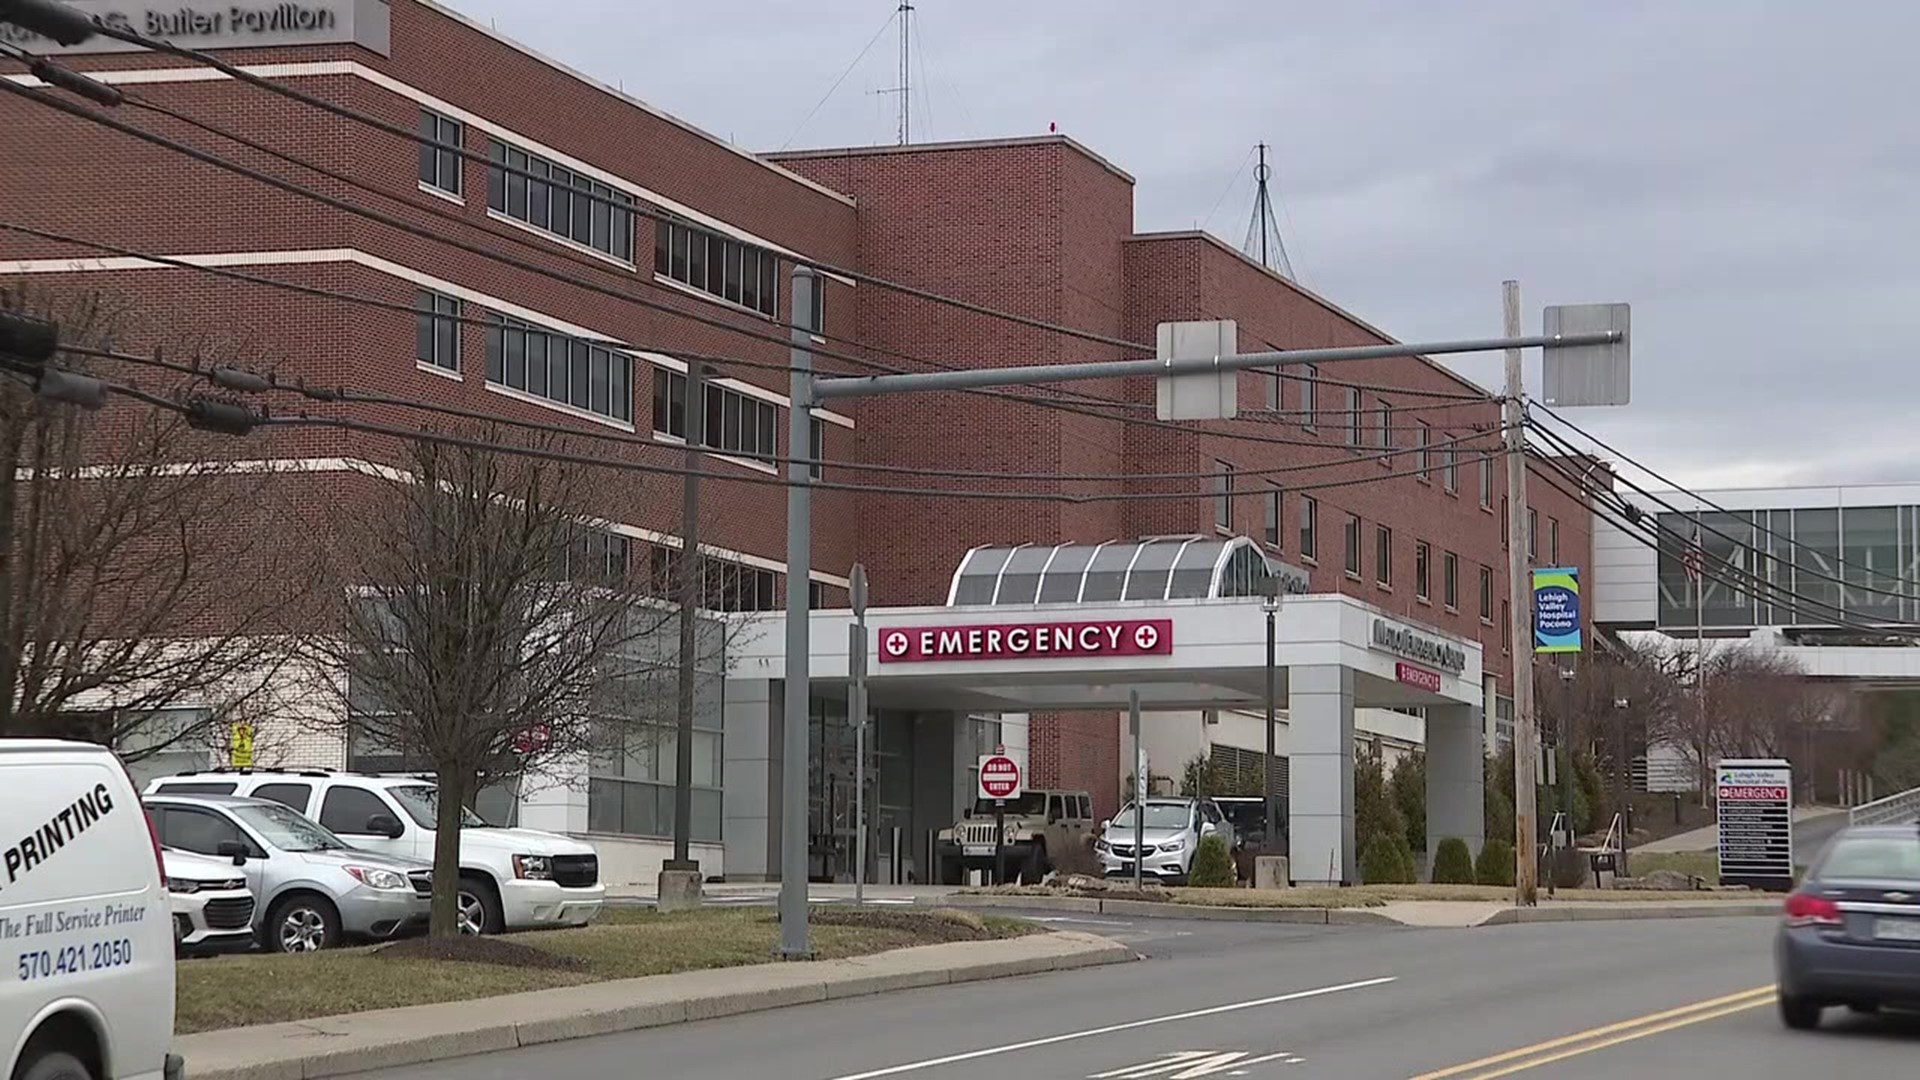 Newswatch 16 checked in with health officials from Lehigh Valley Hospital-Pocono to see how they are keeping up with the number of patients coming in.